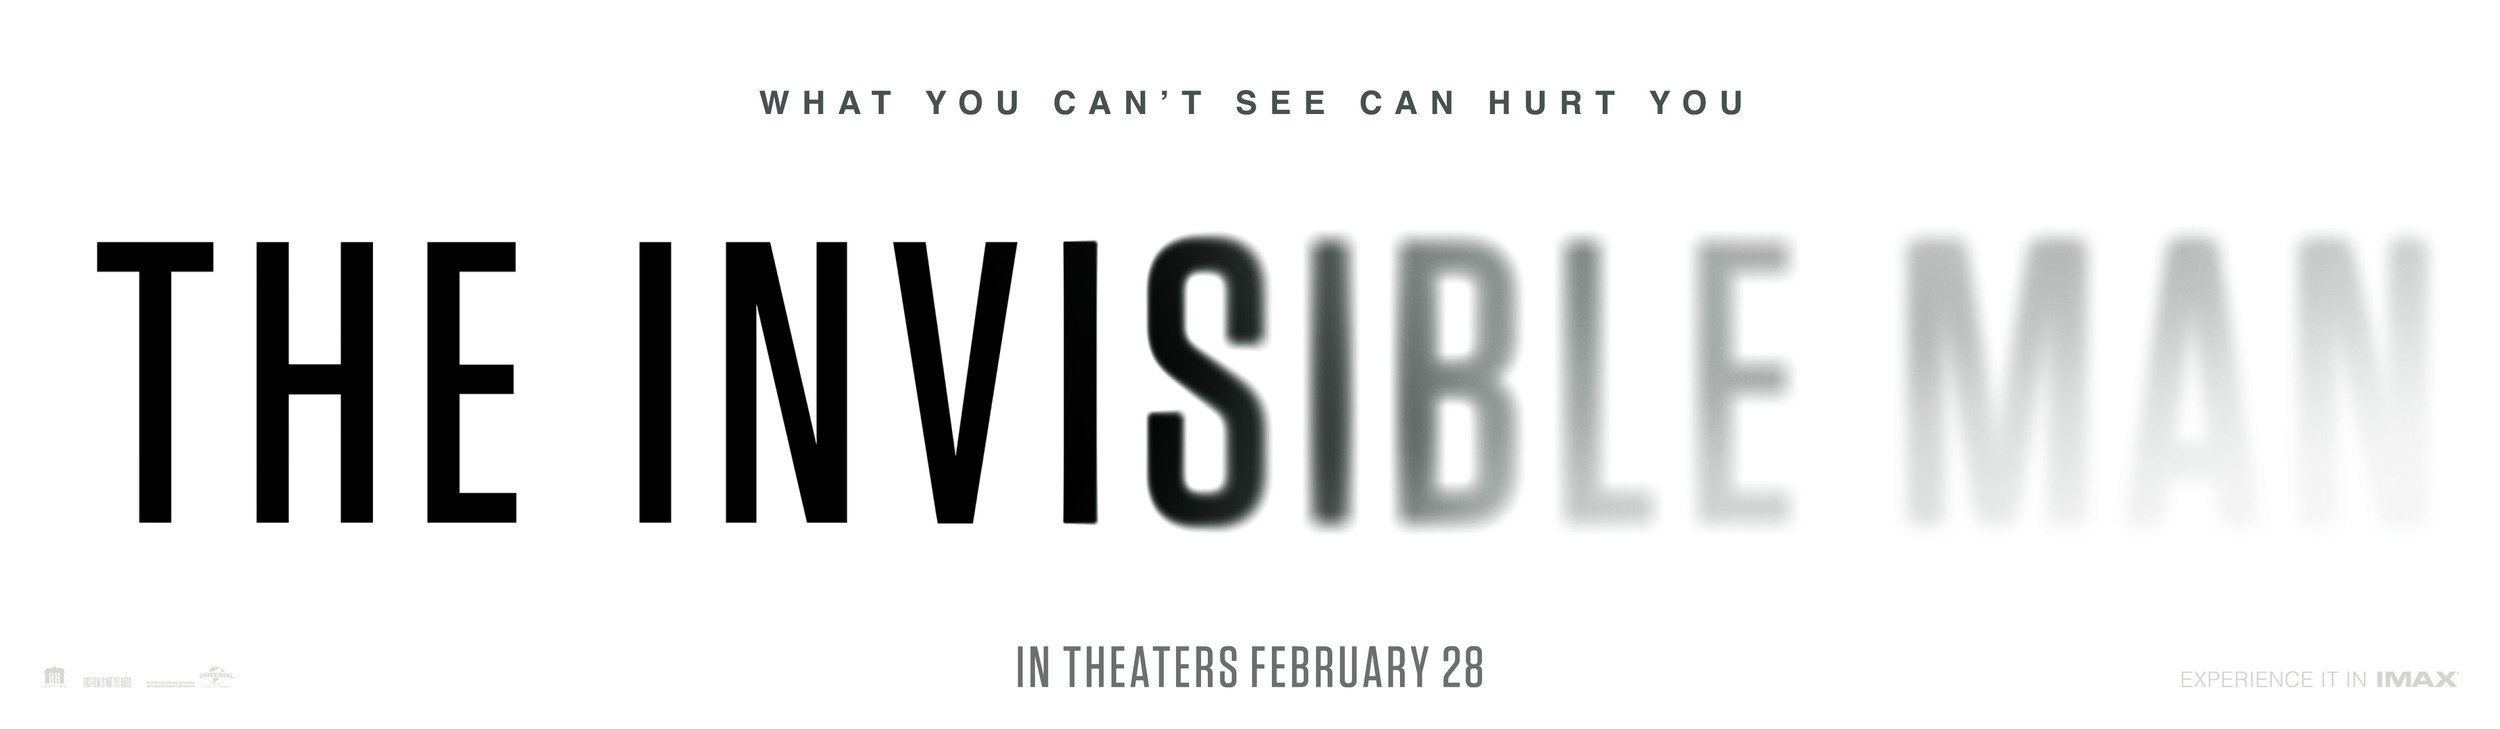 Mega Sized Movie Poster Image for The Invisible Man (#4 of 13)